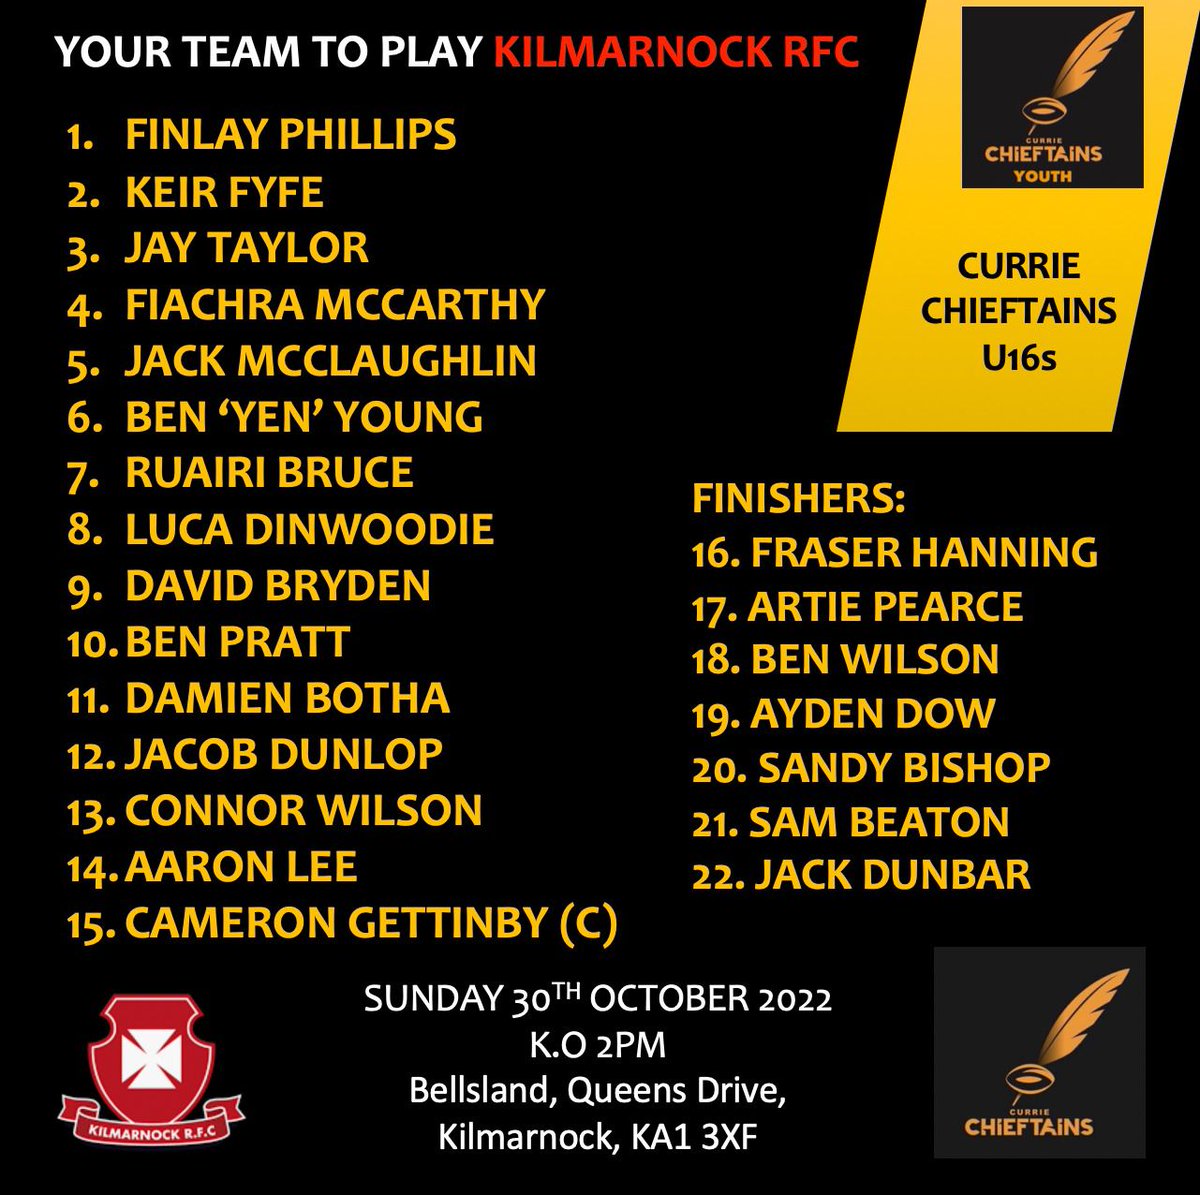 Good luck to our U16’s against @KilmarnockRFC tomorrow. A win will see them qualify for the shield quarter-final 🖤💛